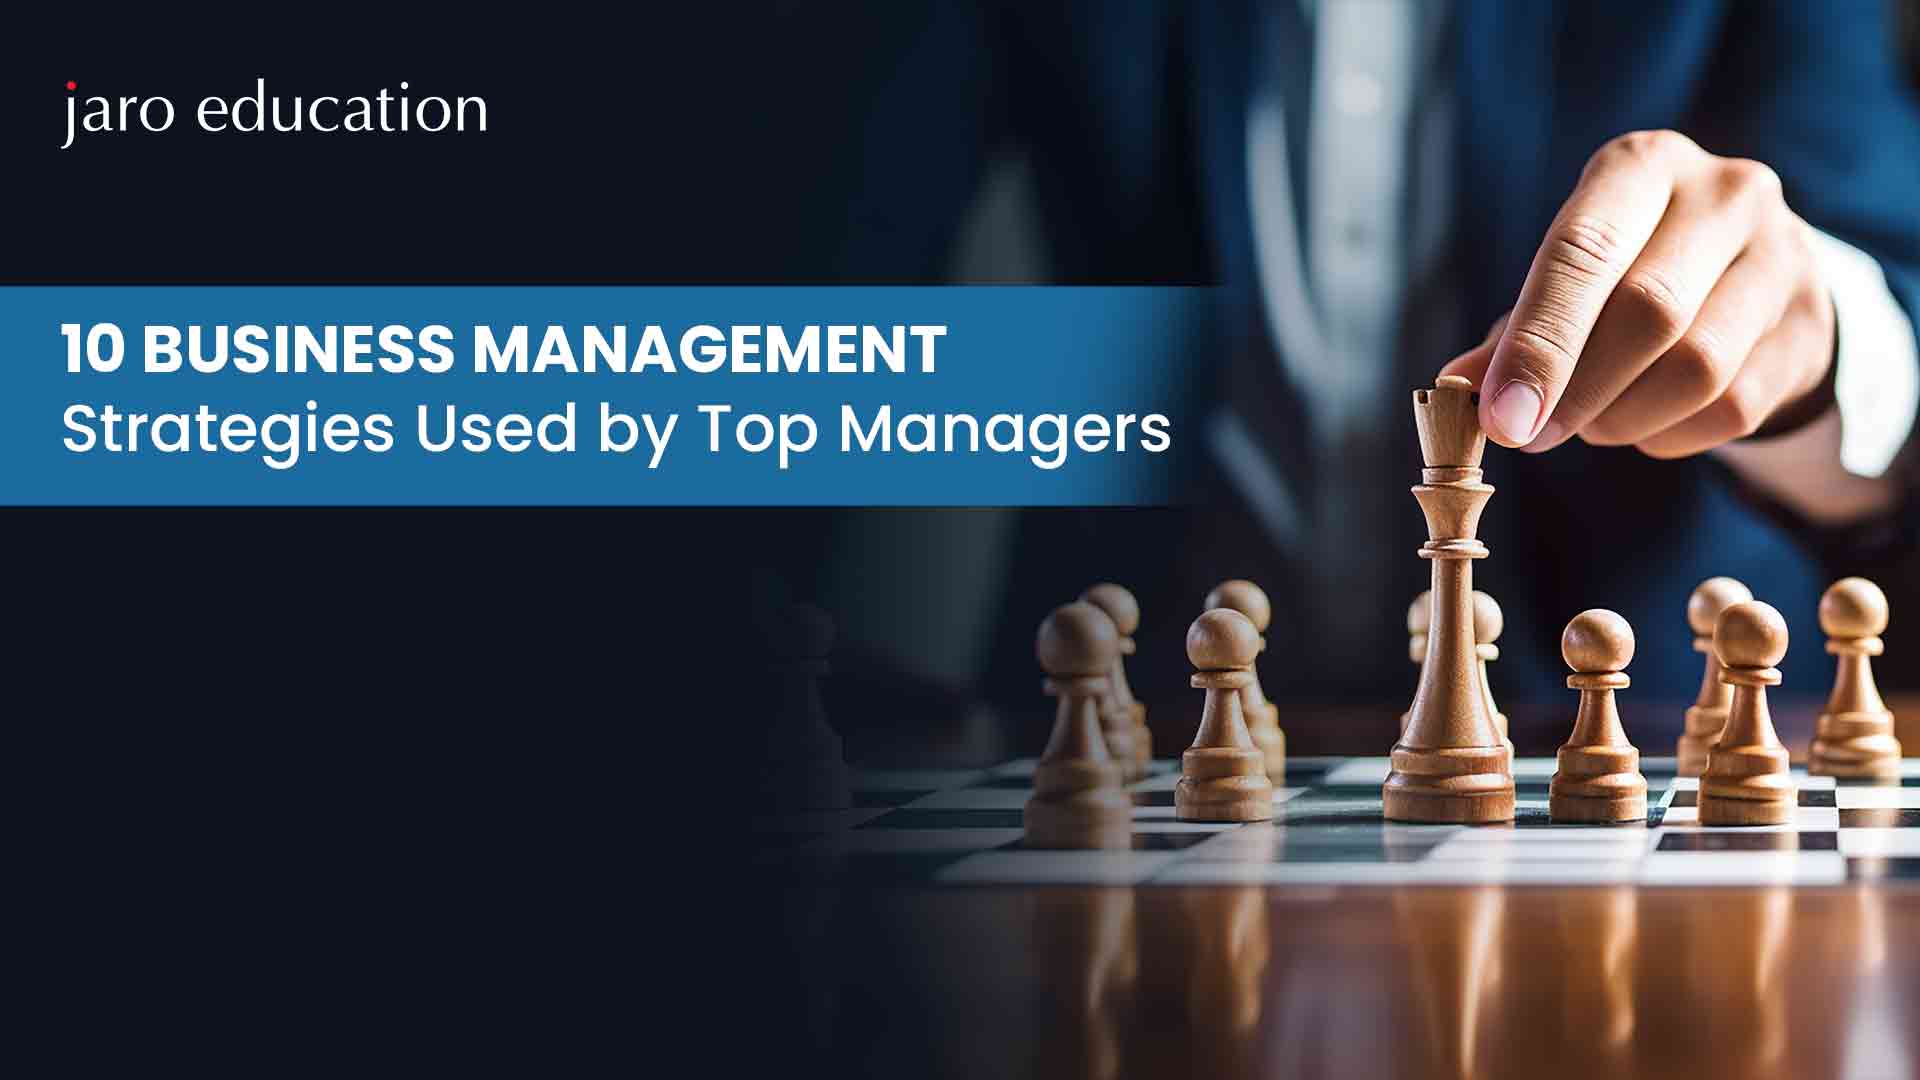 10 Business Management Strategies Used by Top Managers